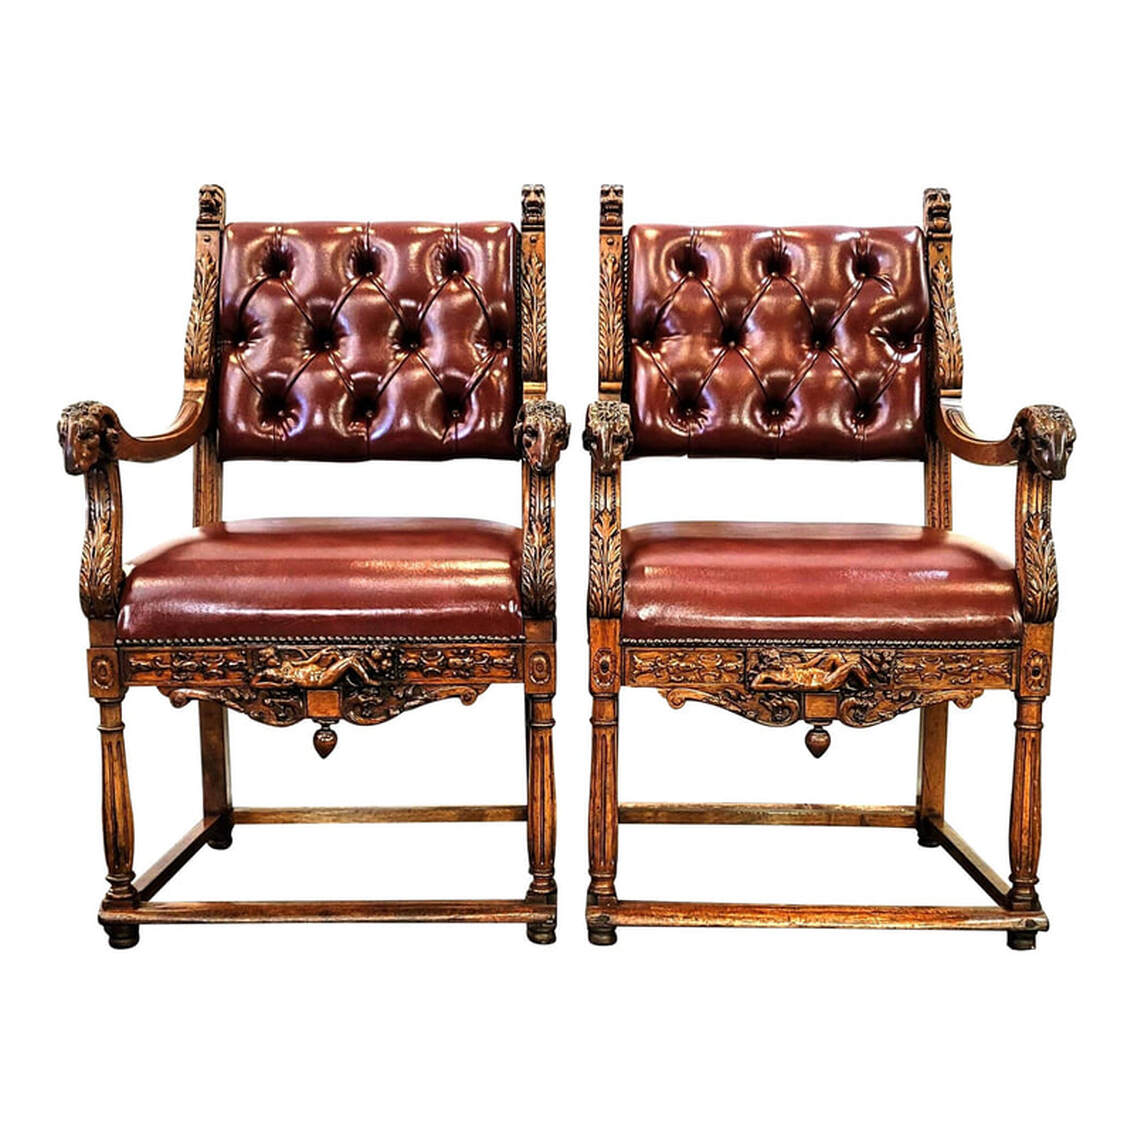 Pair late-19th-century through 1910 walnut French Renaissance Revival armchairs feature carvings of acanthus leaves, lion head finials, ram's heads at the ends of the arms, a nude reclining Demeter with cornucopia at the center of the front seat rails, and stylized scrolling dragons on the front aprons.  The backs and seats are upholstered in leather-like burgundy fabric with button tufting on the backrests.  Four low stretchers connect the legs above padded feet.